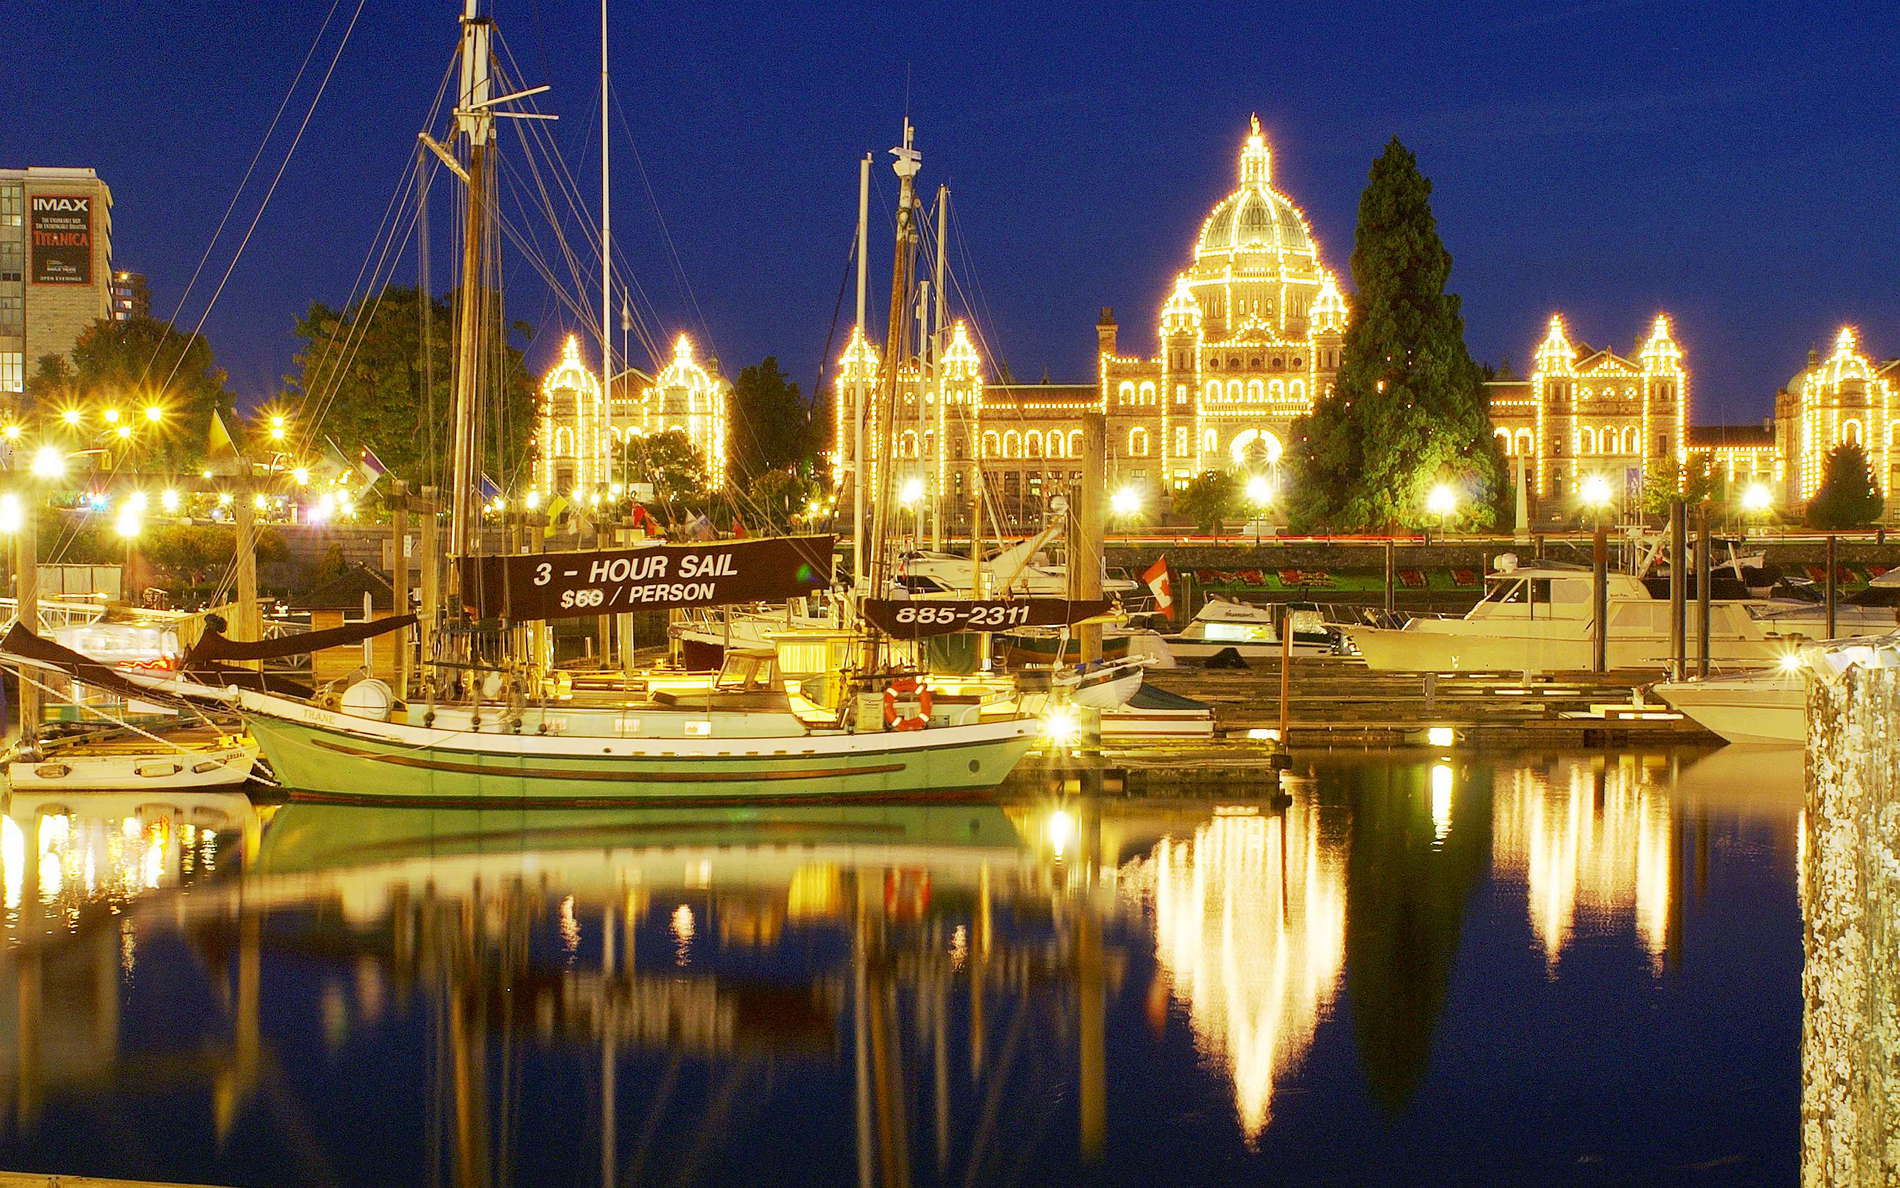 Victoria  |  Inner Harbour and Parliament